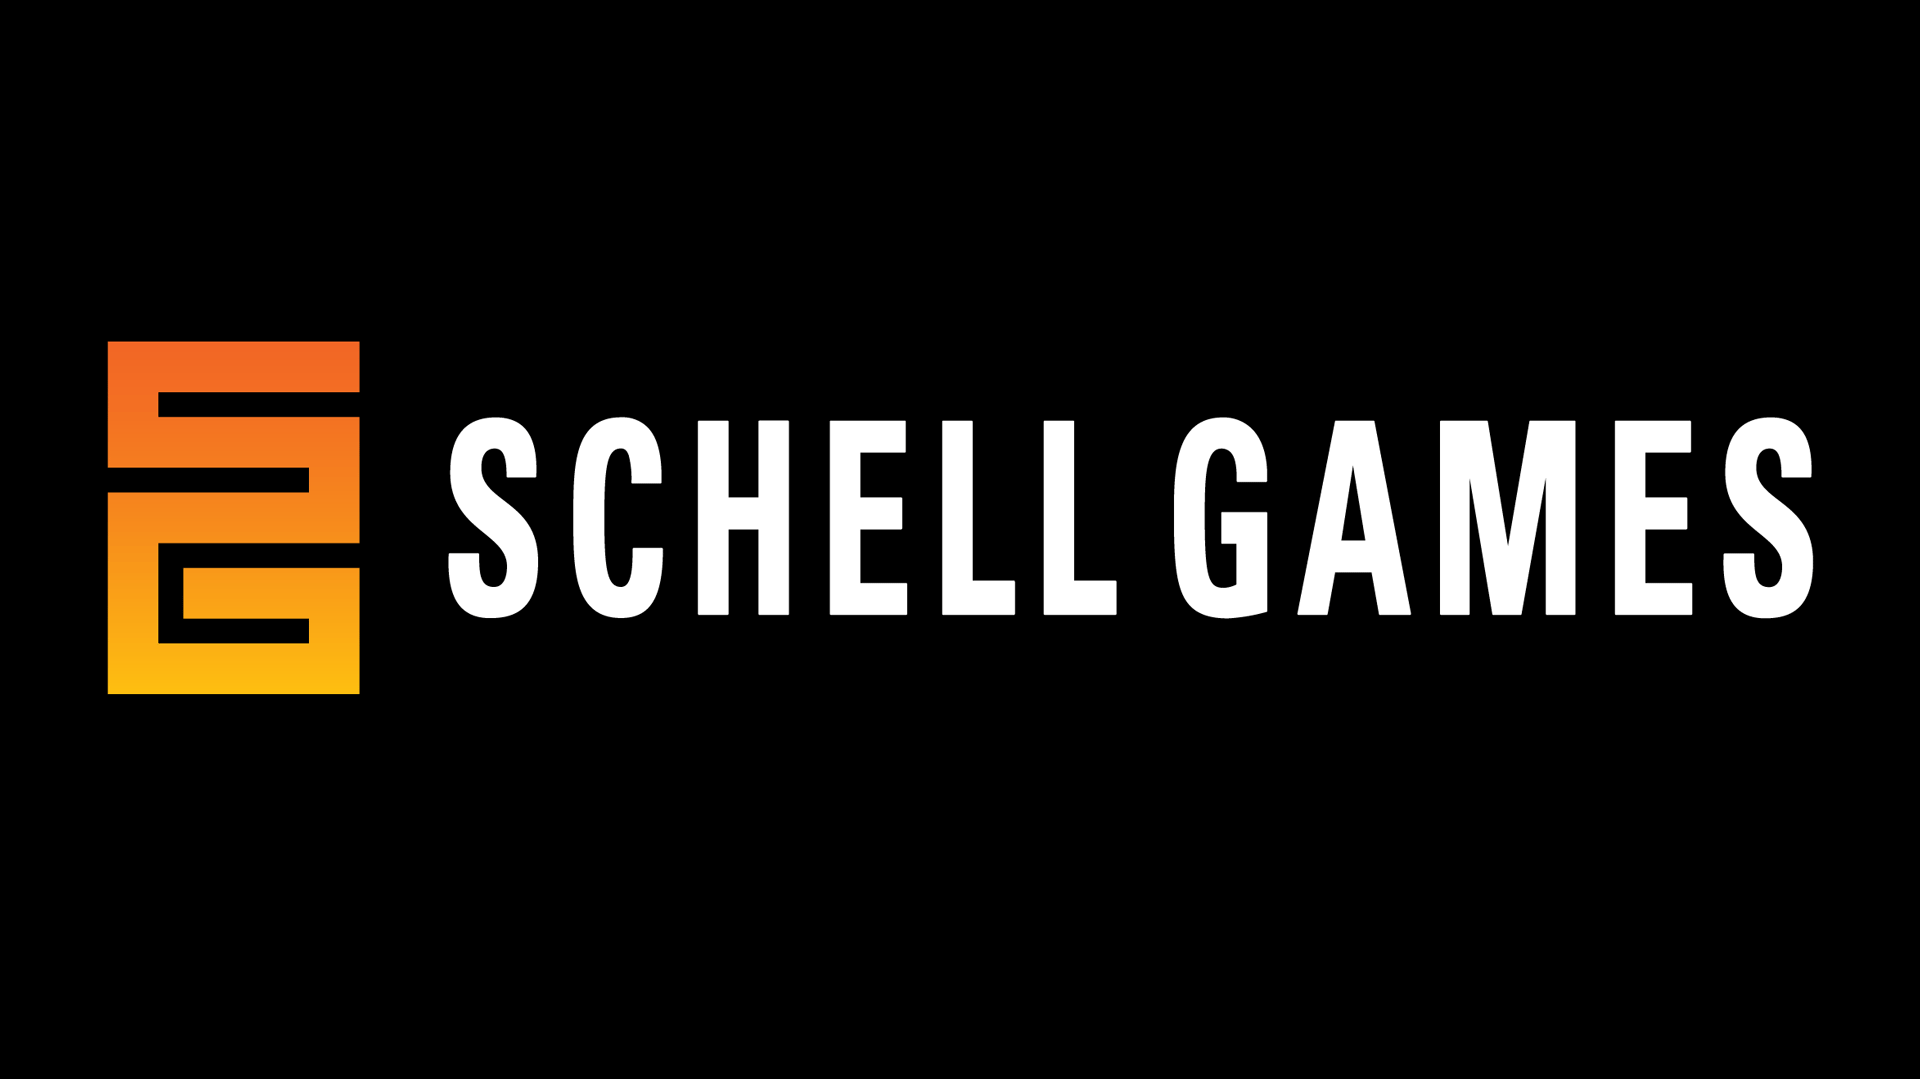 Schell Games Signs With Meta for 3 New Quest Games in Next 2 Years